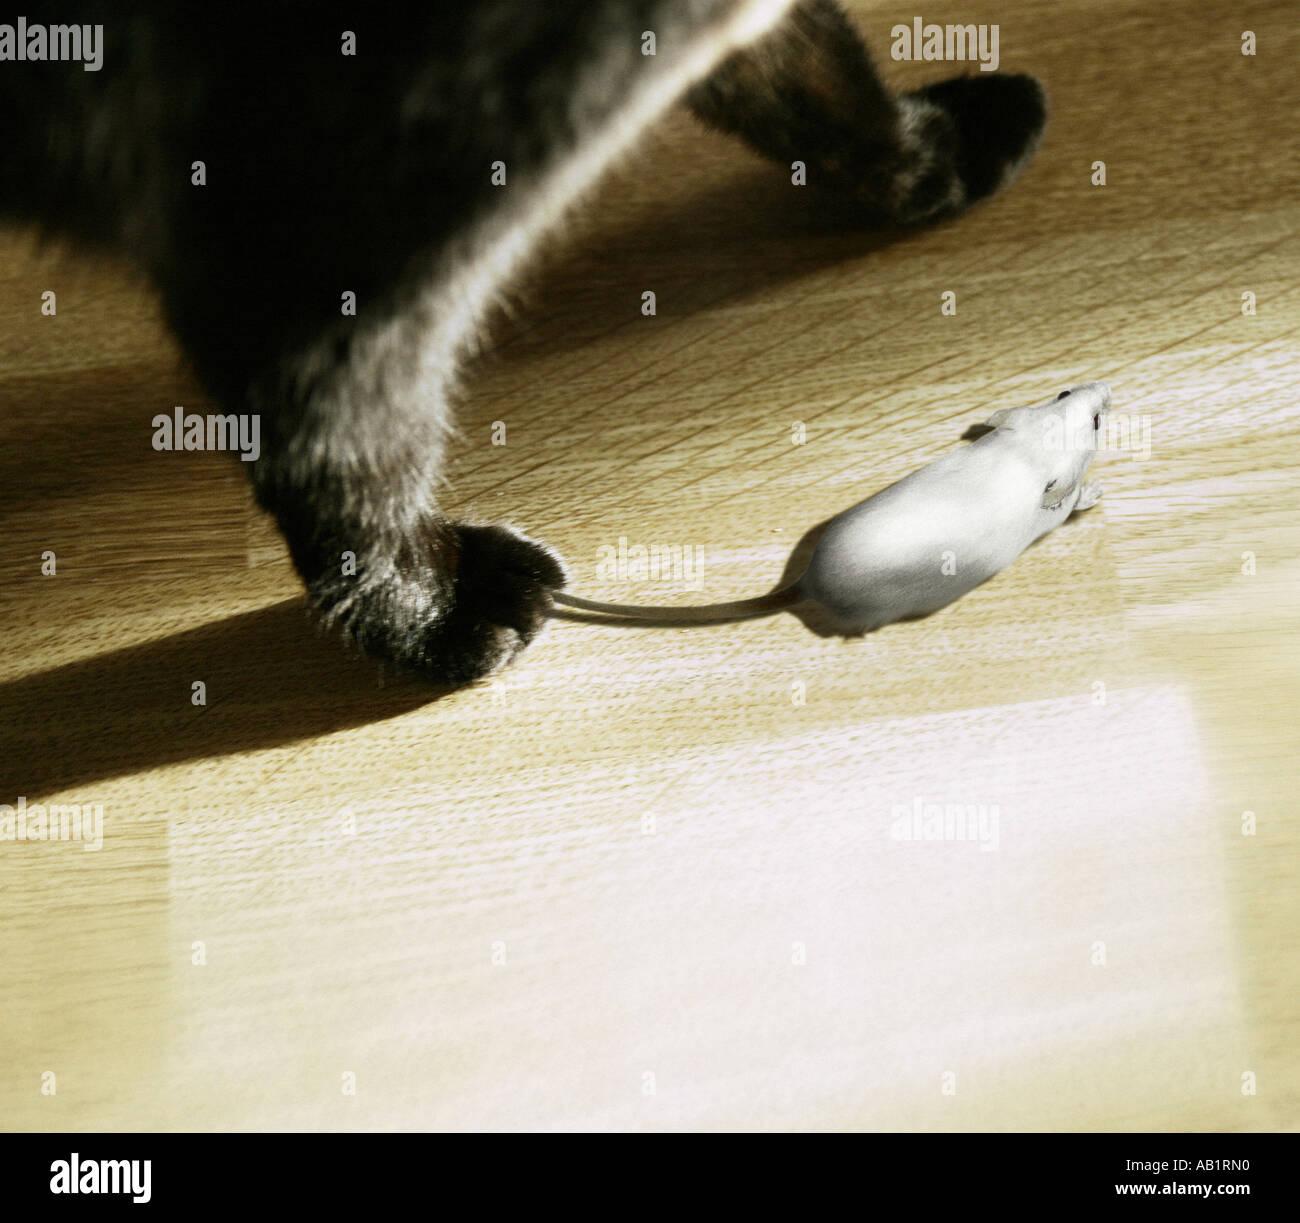 a cat catching a mouse Stock Photo